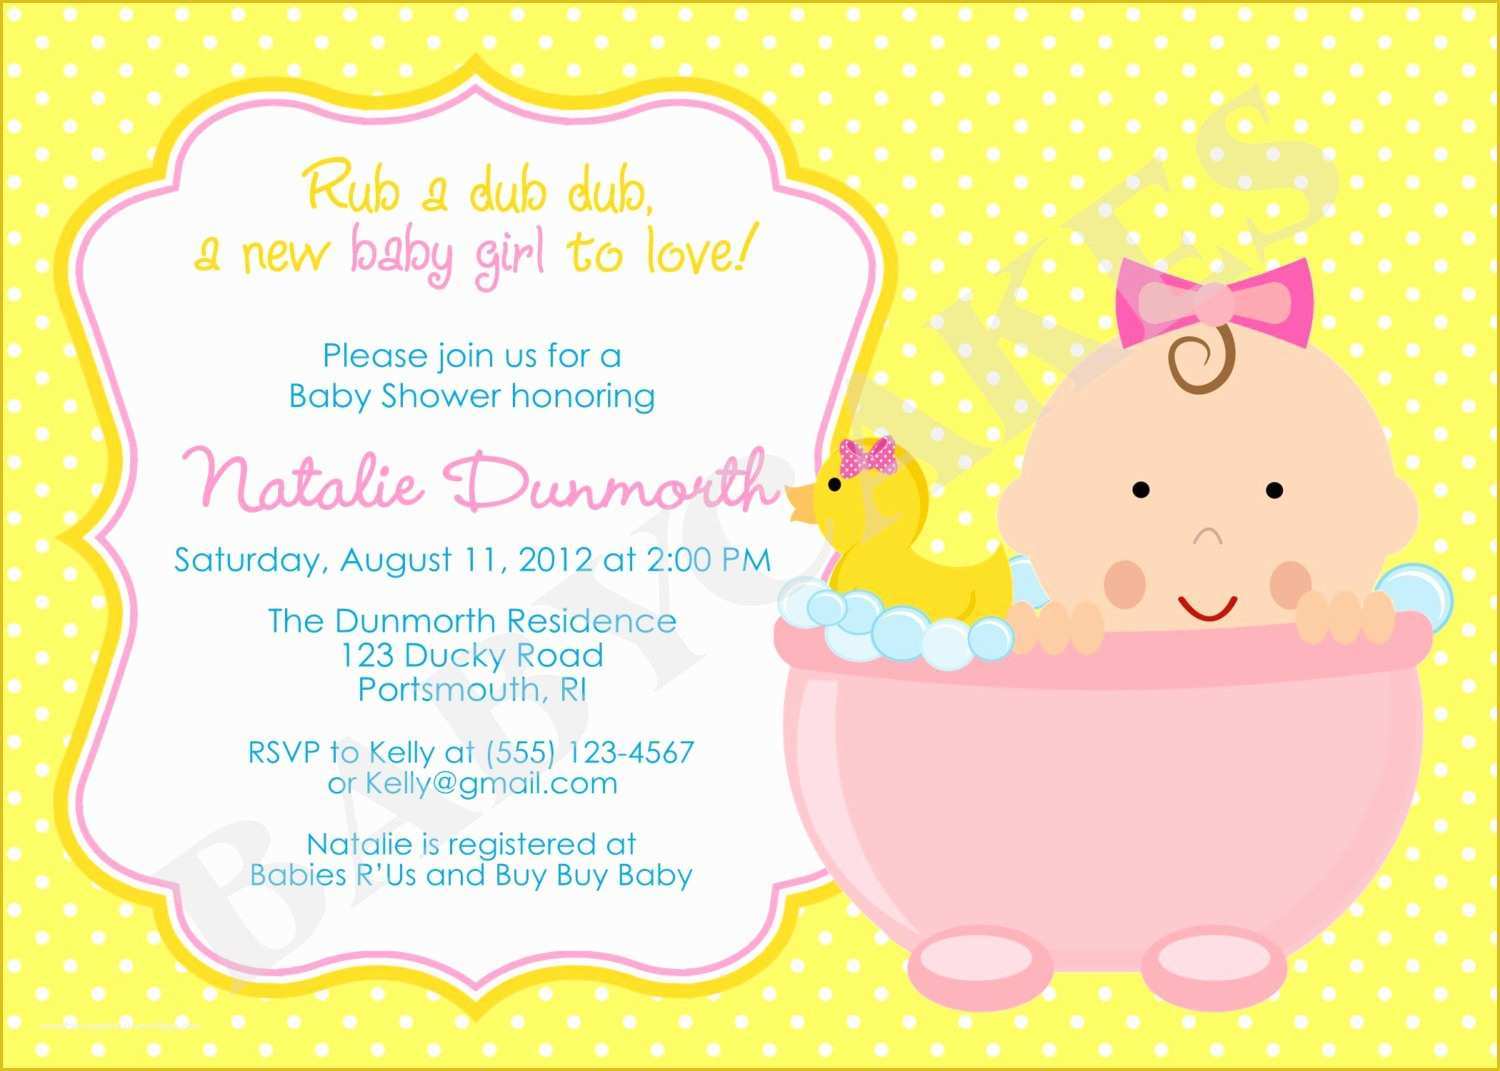 Free Rubber Ducky Baby Shower Invitations Template Of How to Plan Rubber Ducky Baby Shower Ideas